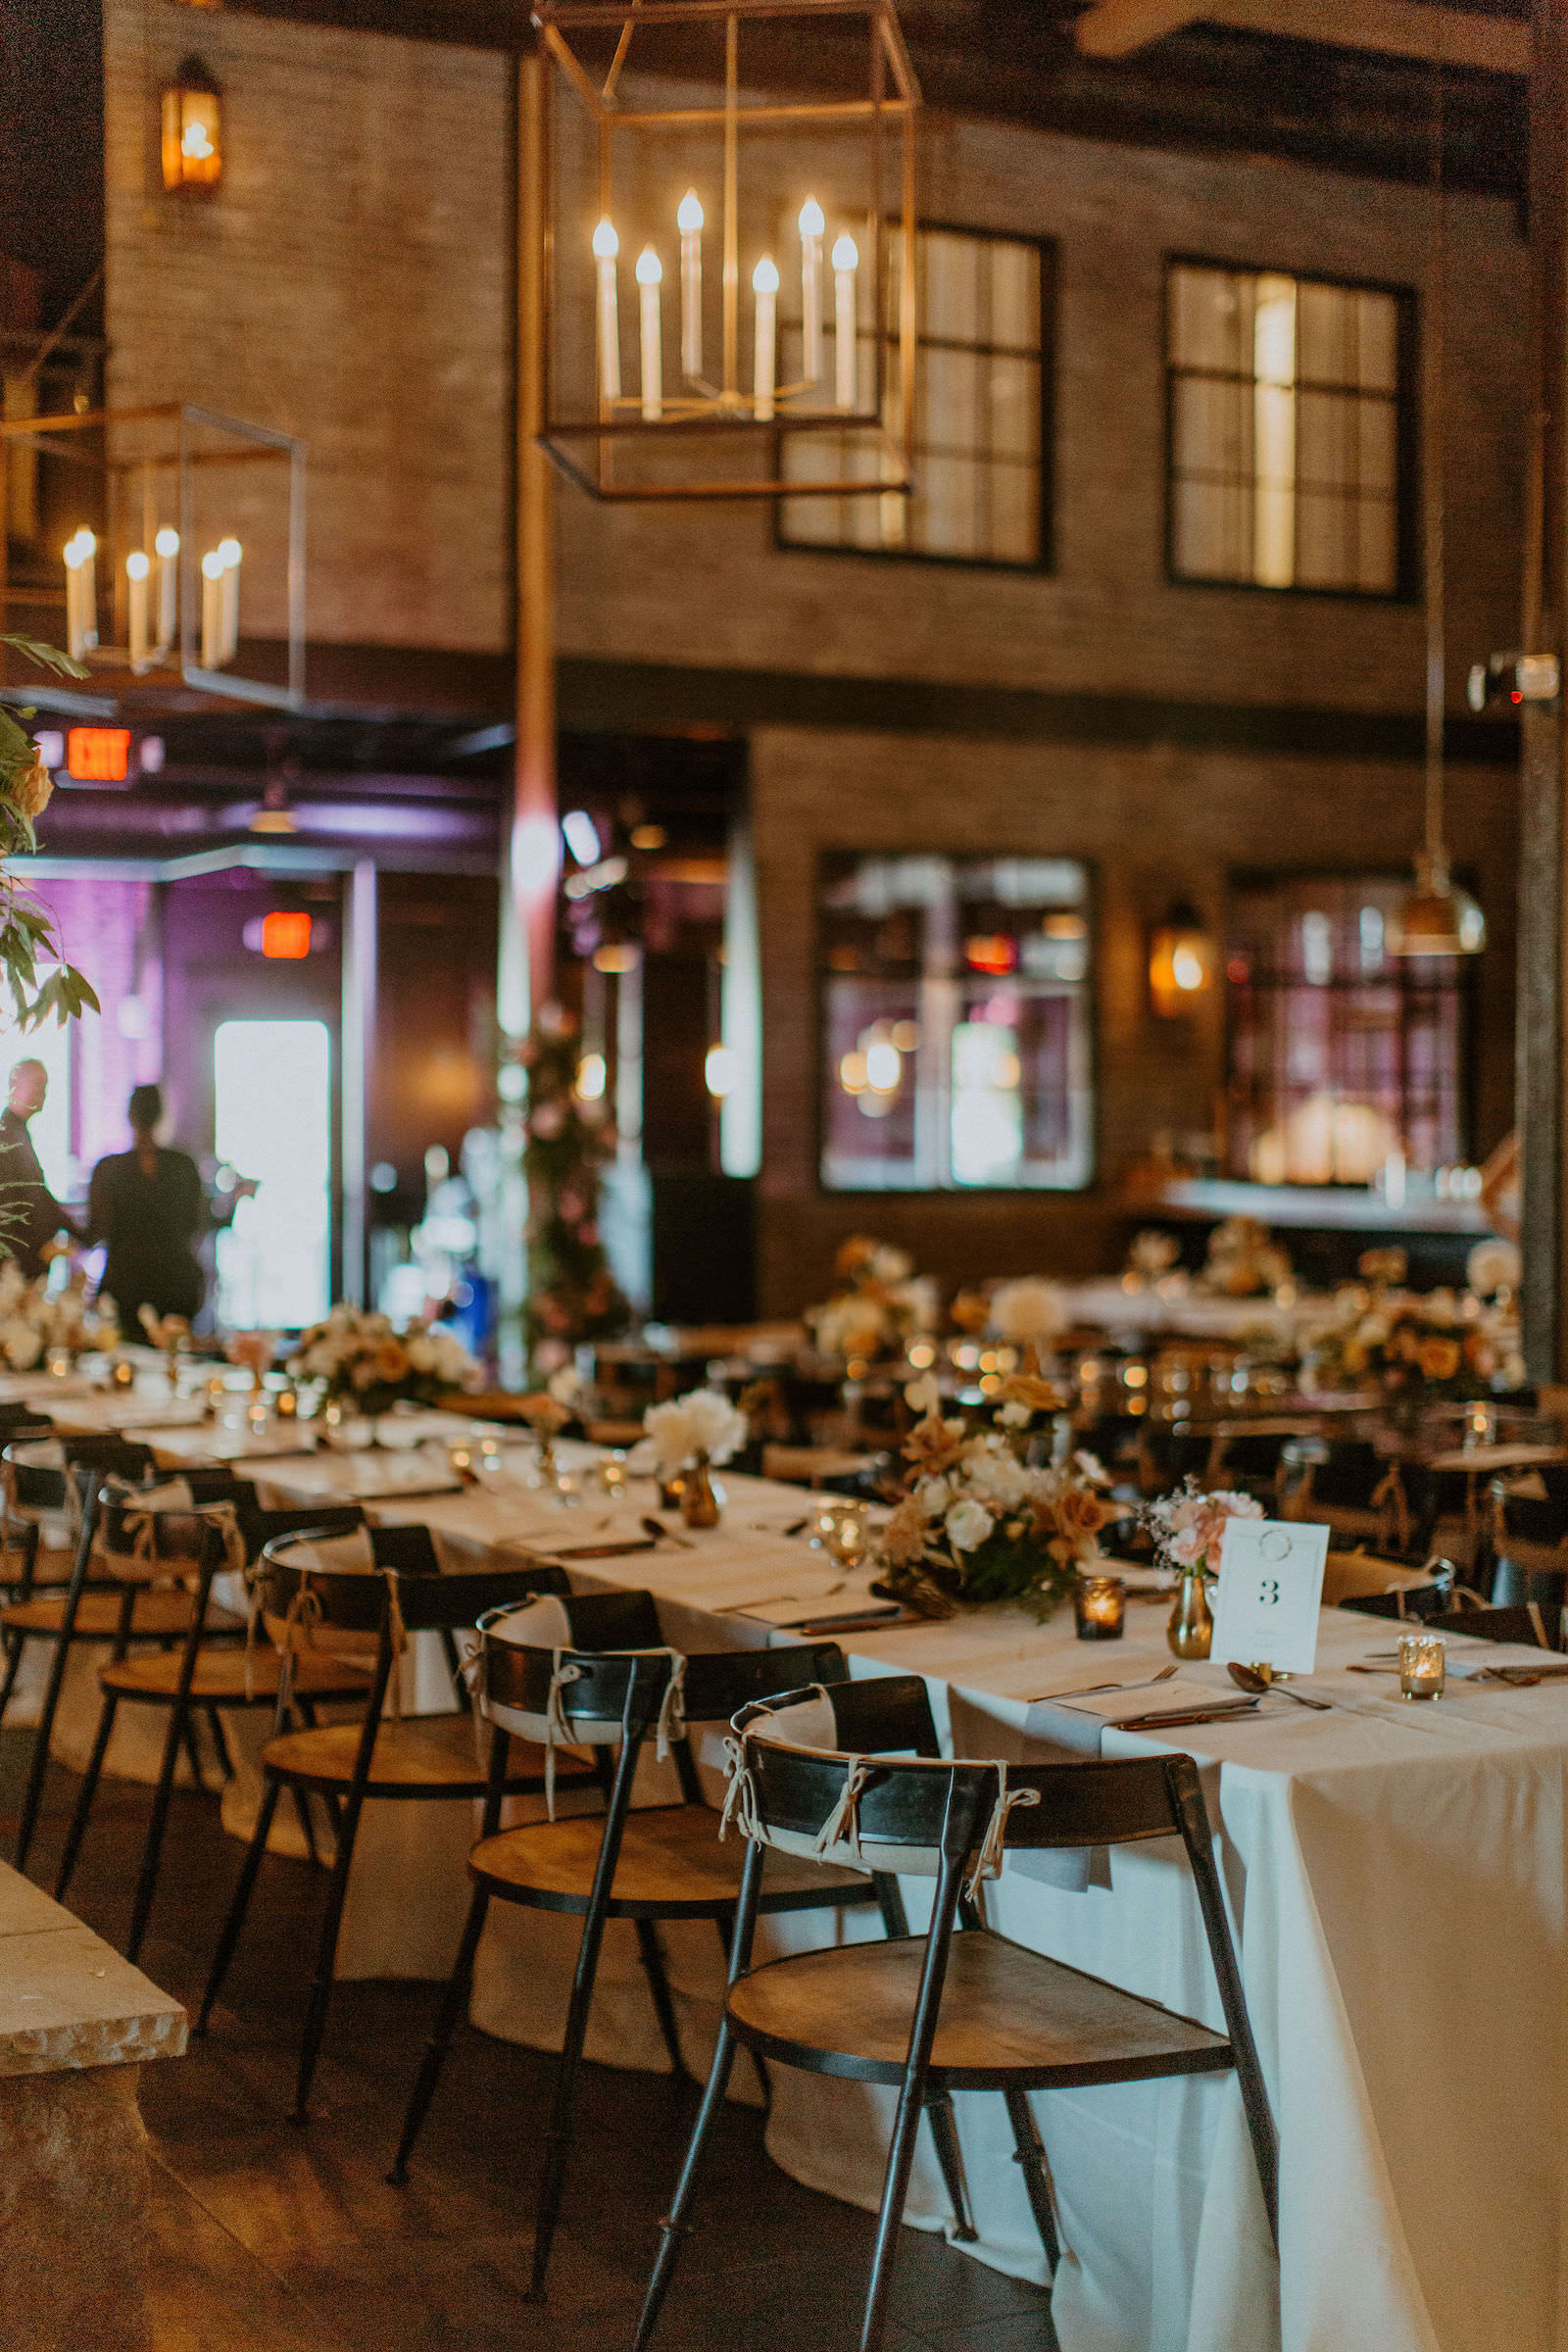 Indoor Industrial Style Wedding Reception with Wooden Chairs and White Long Linen Tablescapes | Urban Stillhouse St. Pete Wedding Reception Venue